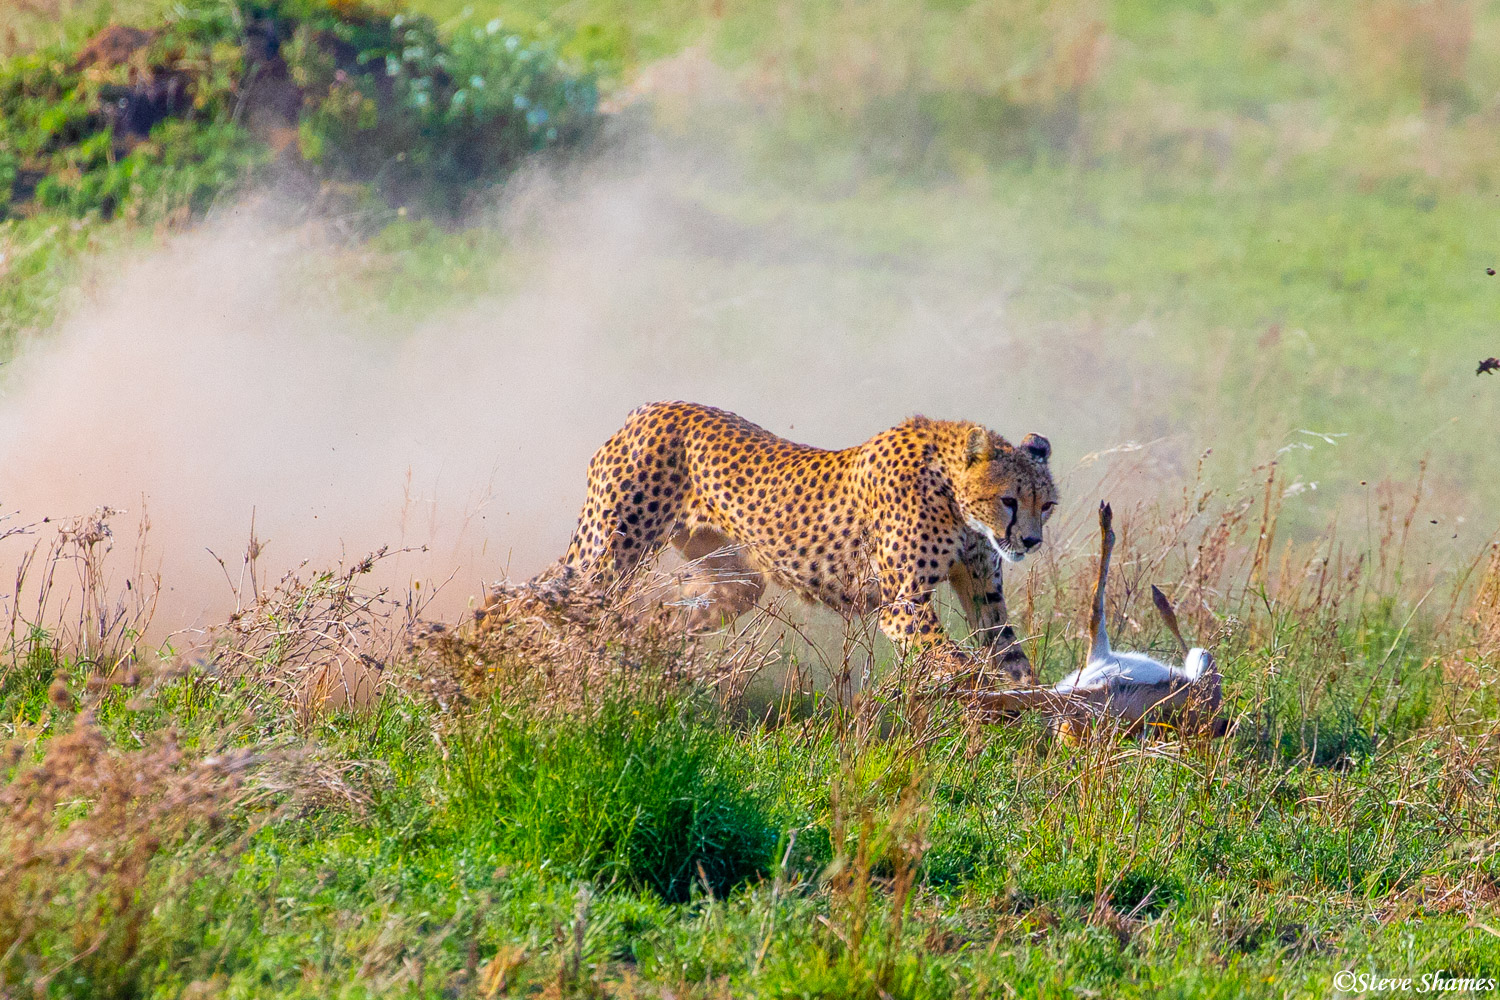 And here in a cloud of dust, the cheetah catches the gazelle.